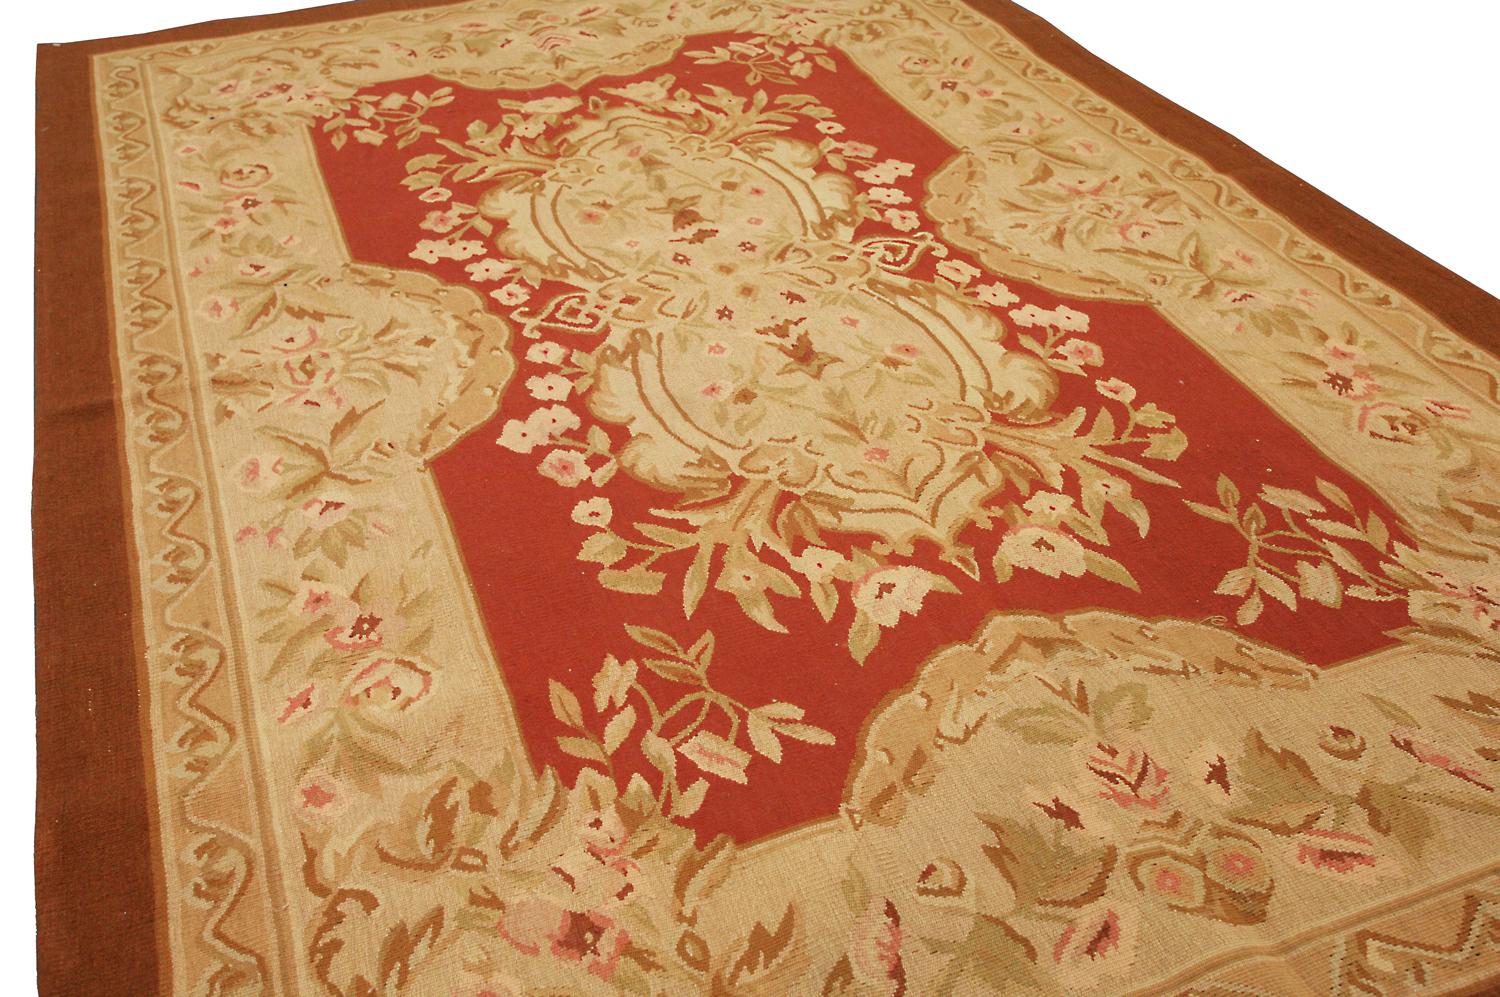 This is an exquisite Chinese Aubusson flat-weave rug with a medallion and floral design. It's perfect for anyone who wants to add some elegance to their home. The ivory color contrasting well with the red brick field is beautiful, and the floral